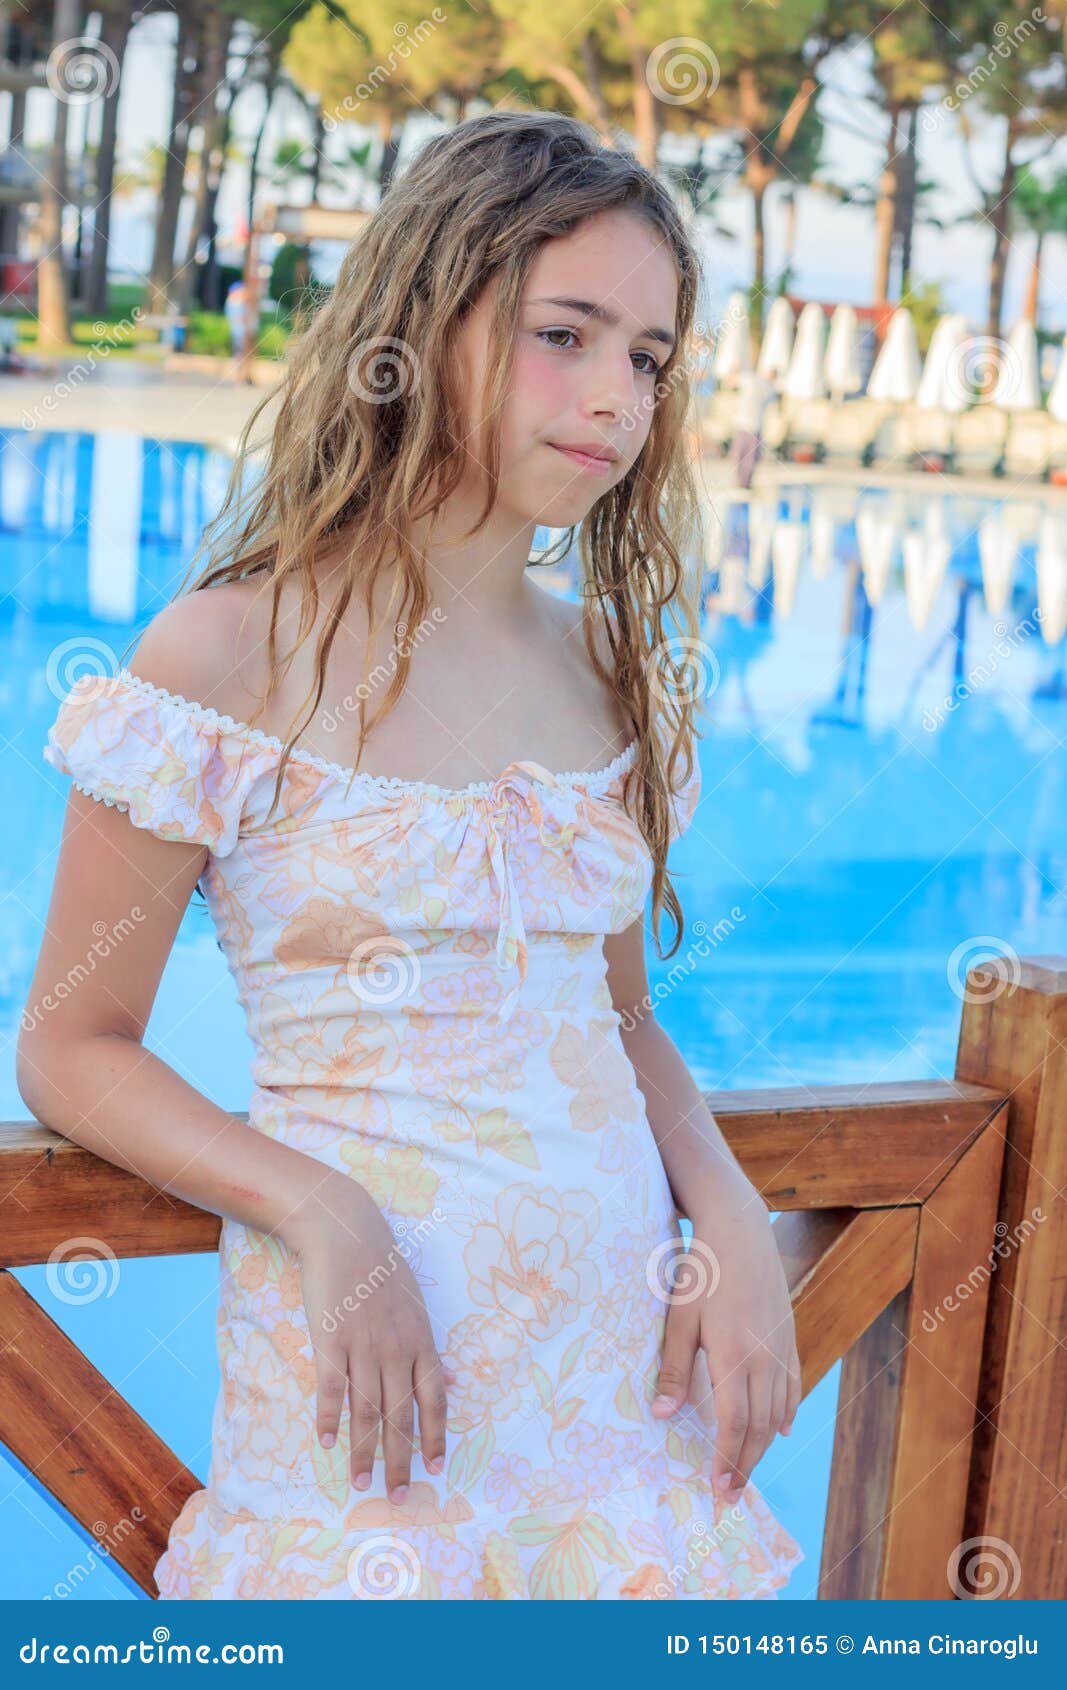 Cute Teen Girl in a Romantic Dress and with Long Hair is Standing on the  Bridge by the Pool Stock Image - Image of clean, beauty: 150148165